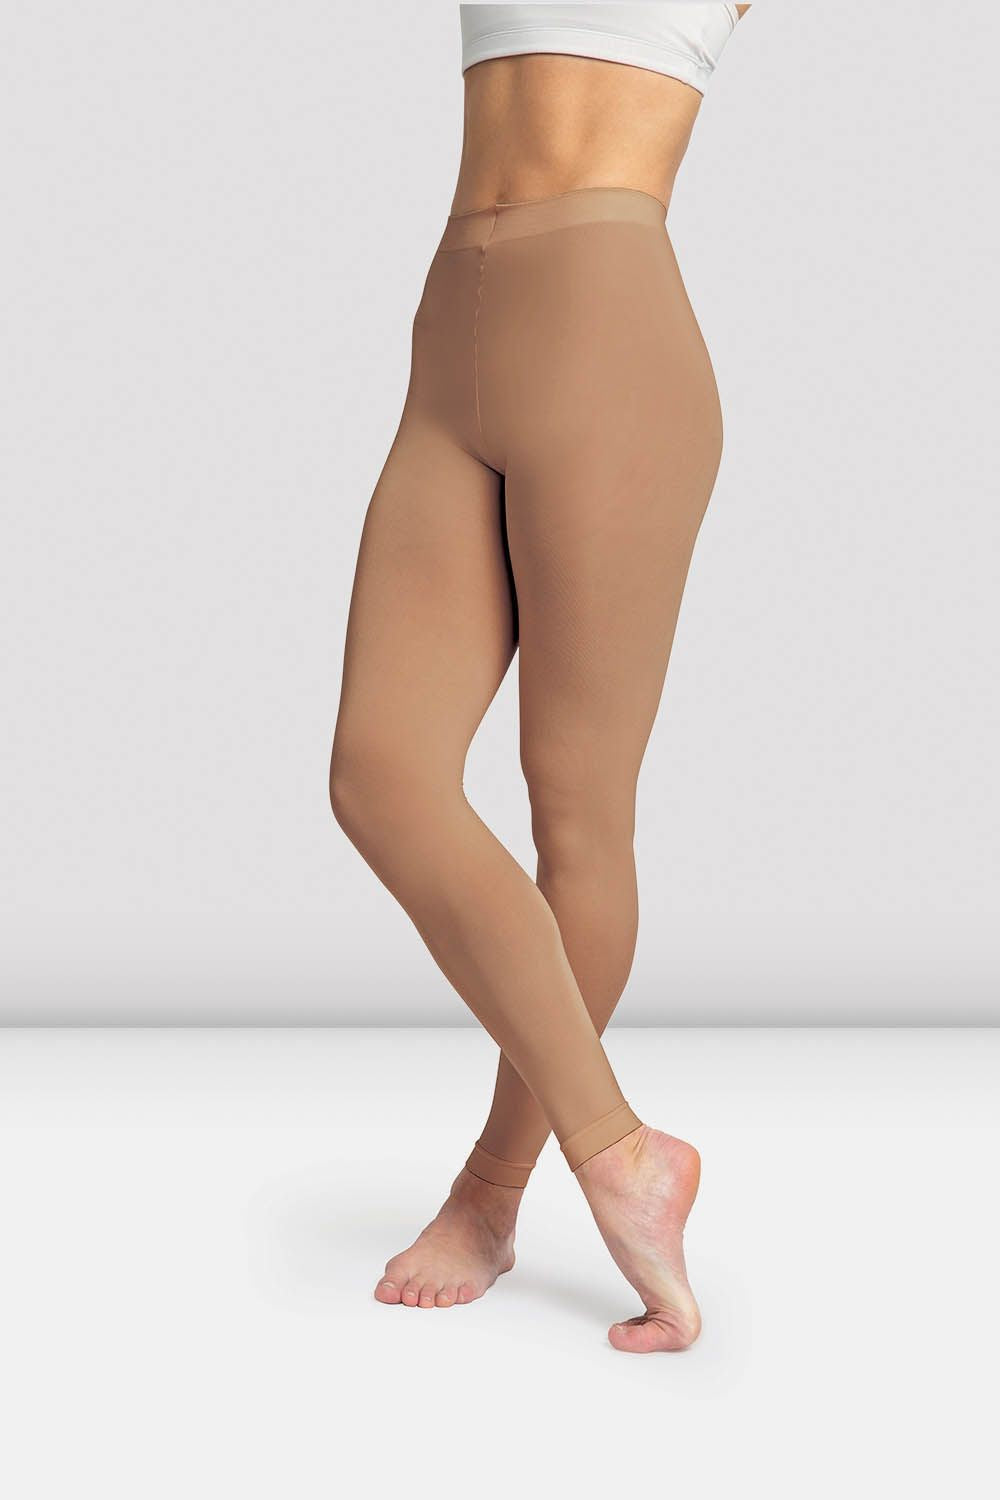 Bloch Ladies Footless Tights in Tan T0985L - The Dance Shop